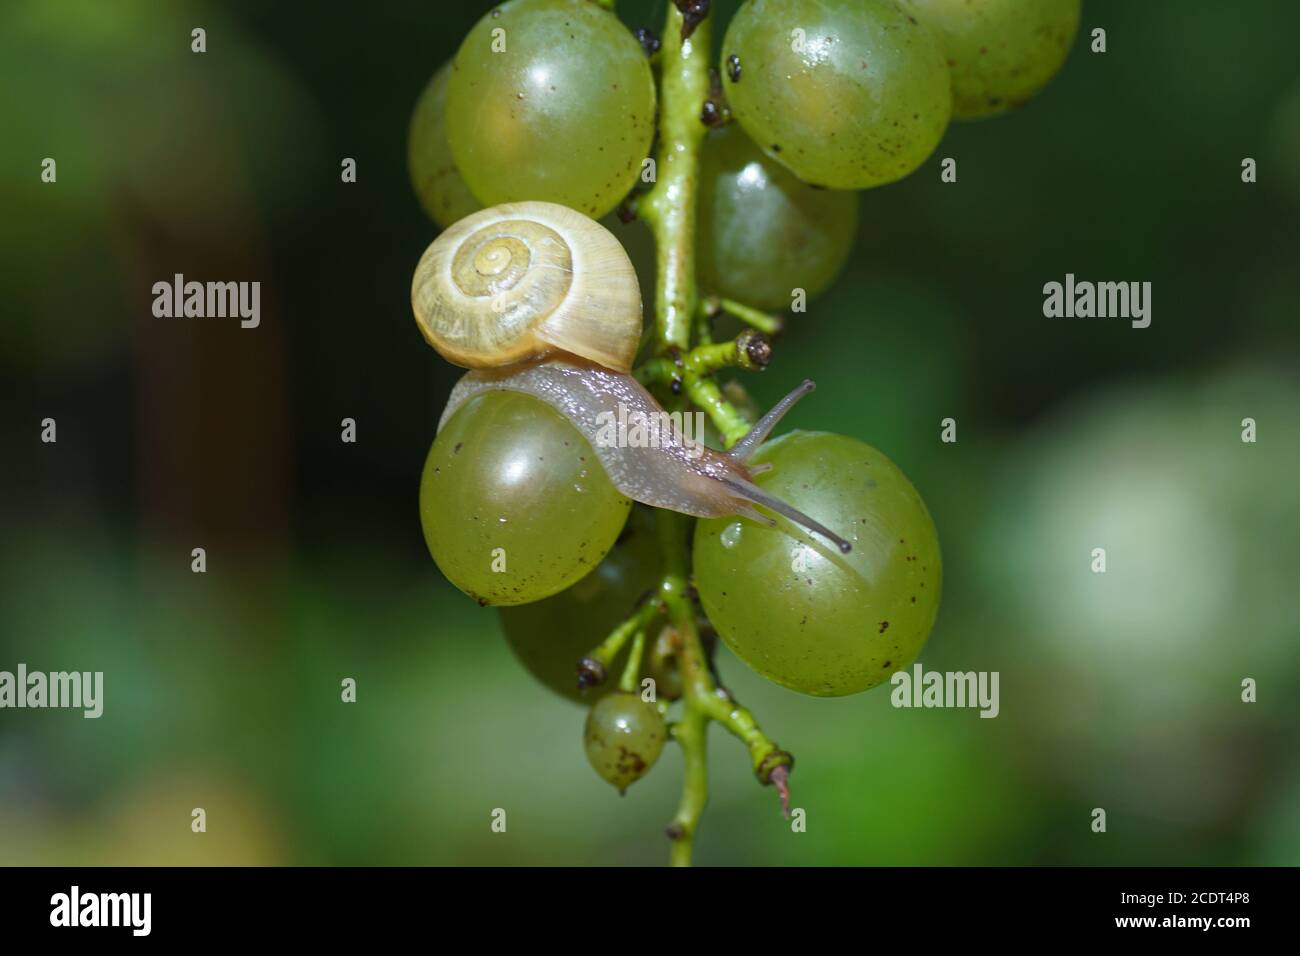 A grove snail (Cepaea nemoralis) on a bunch of grapes. Family Helicidae. August, in a Dutch garden. Netherlands. Stock Photo